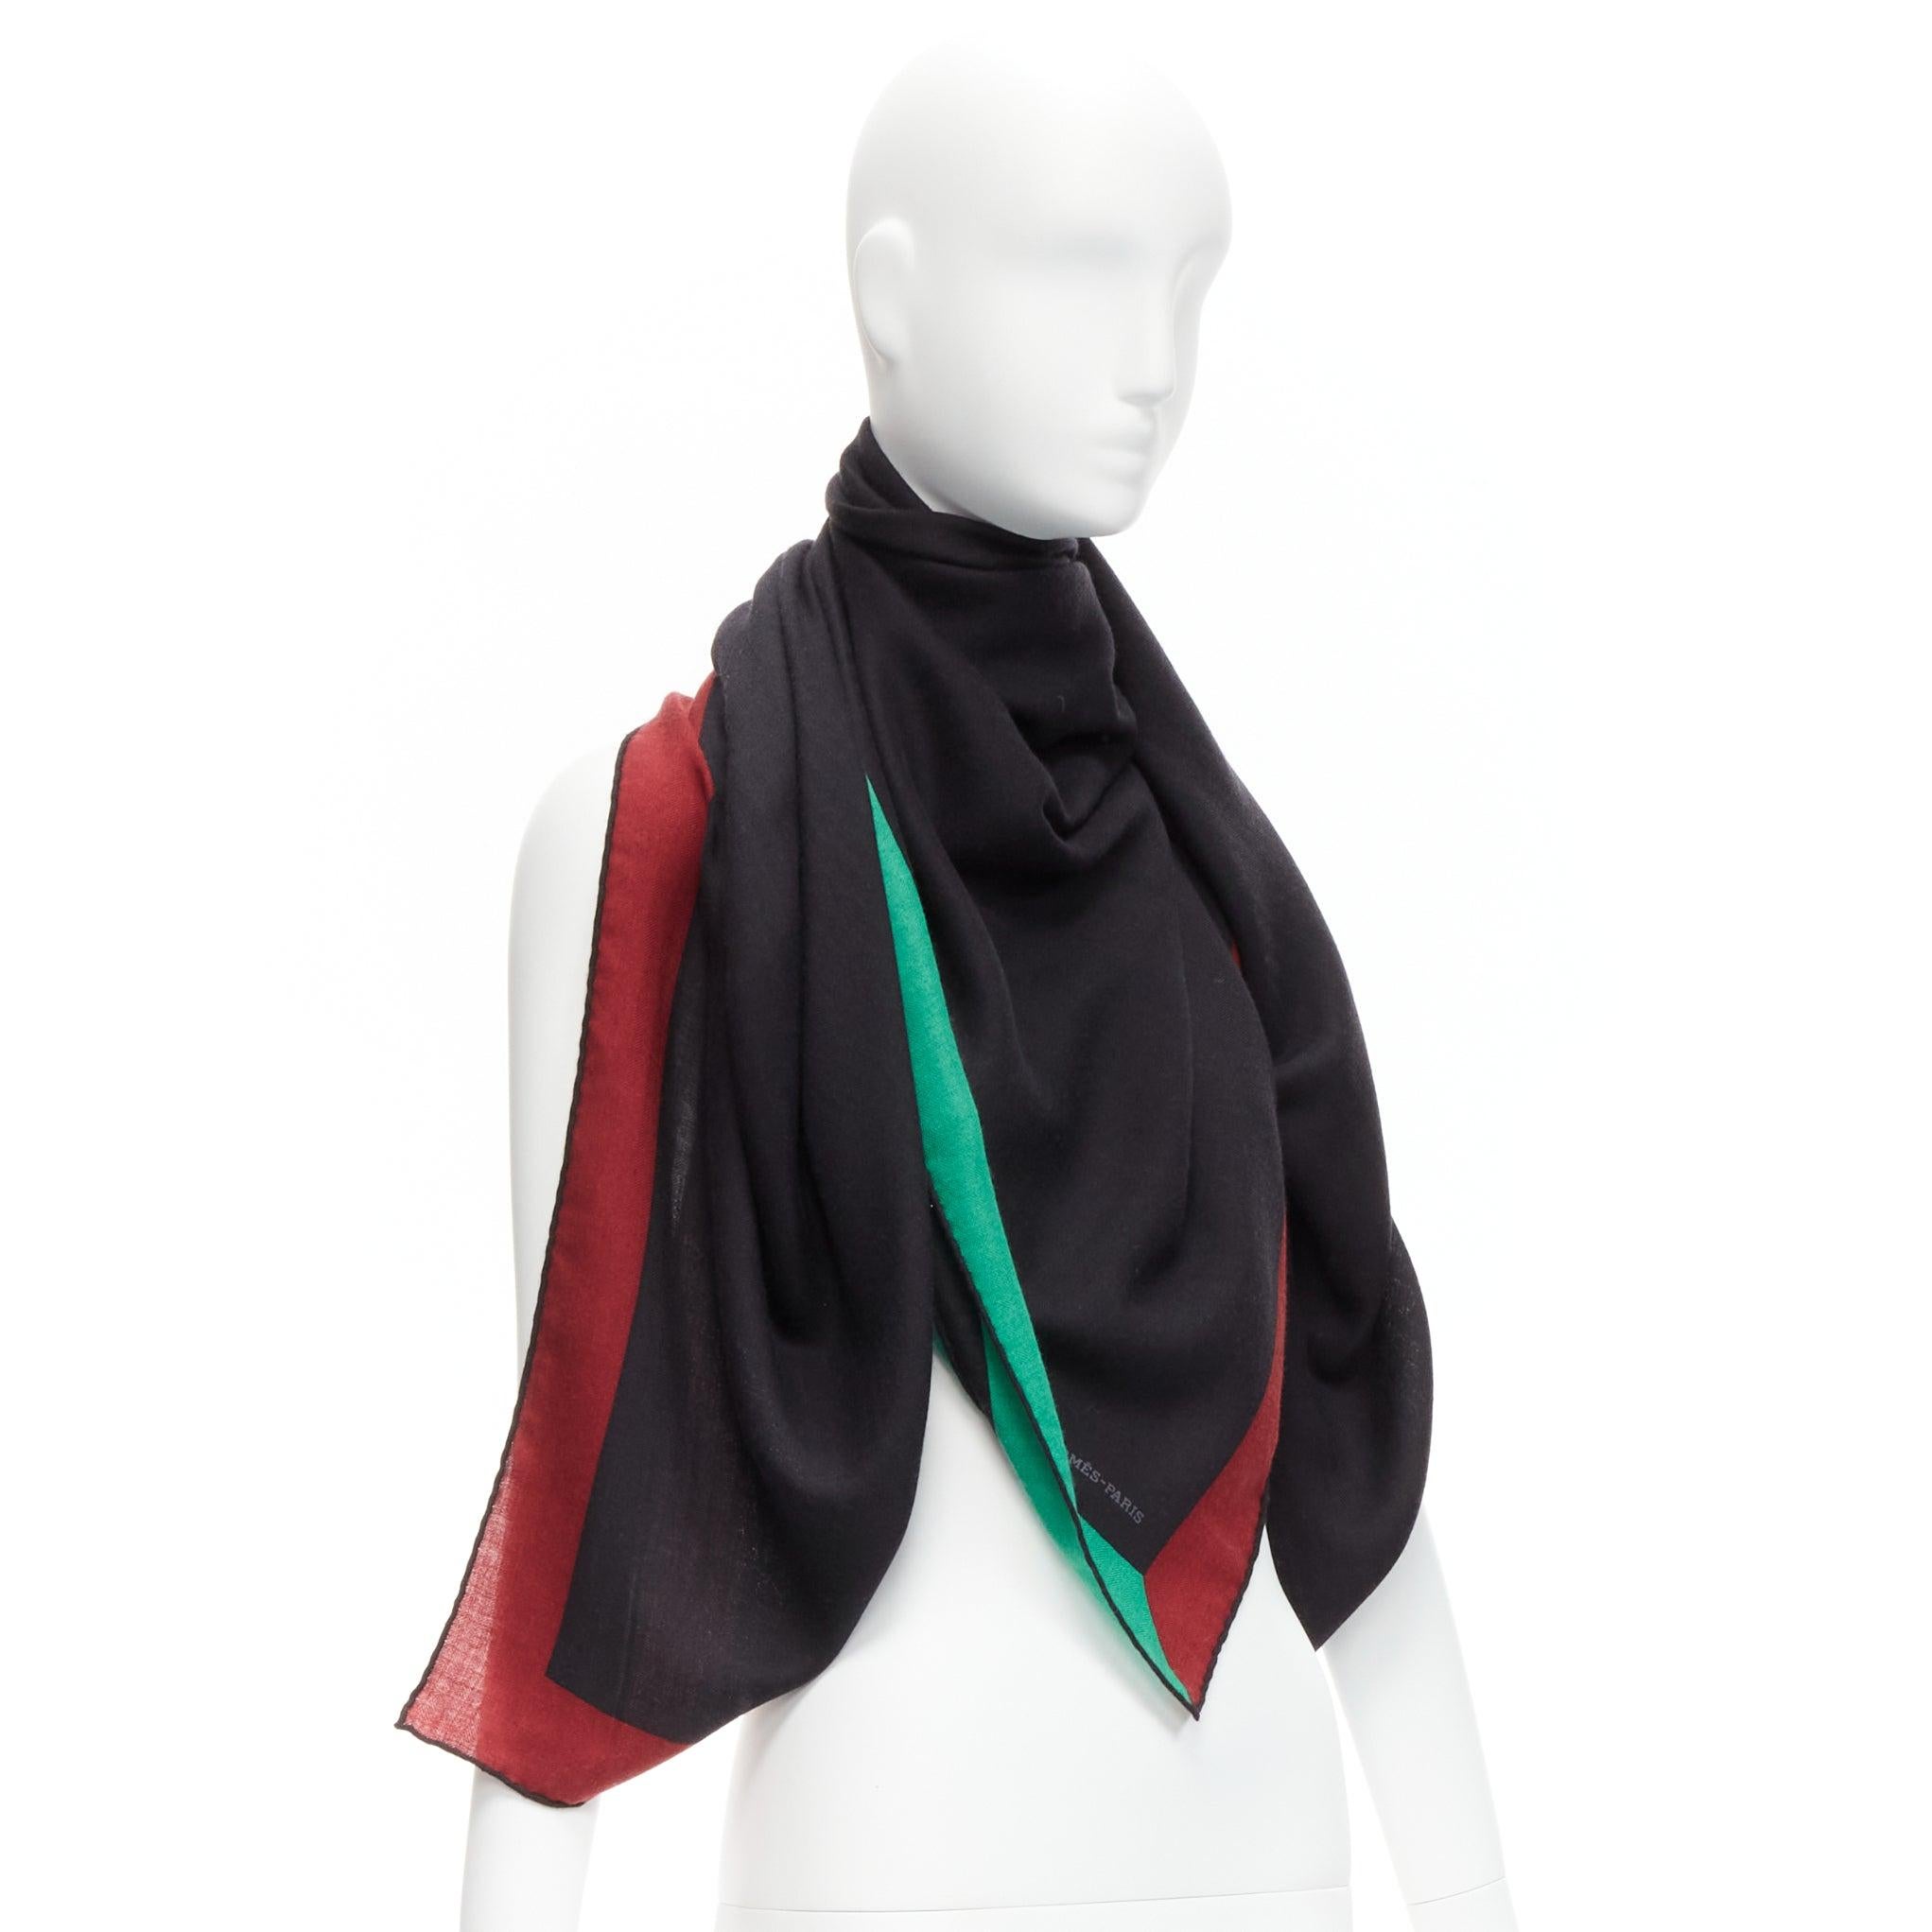 HERMES black red green cashmere silk herringbone abstract colorblock scarf
Reference: KEDG/A00263
Brand: Hermes
Material: Cashmere, Silk
Color: Black, Multicolour
Pattern: Solid
Made in: France

CONDITION:
Condition: Excellent, this item was